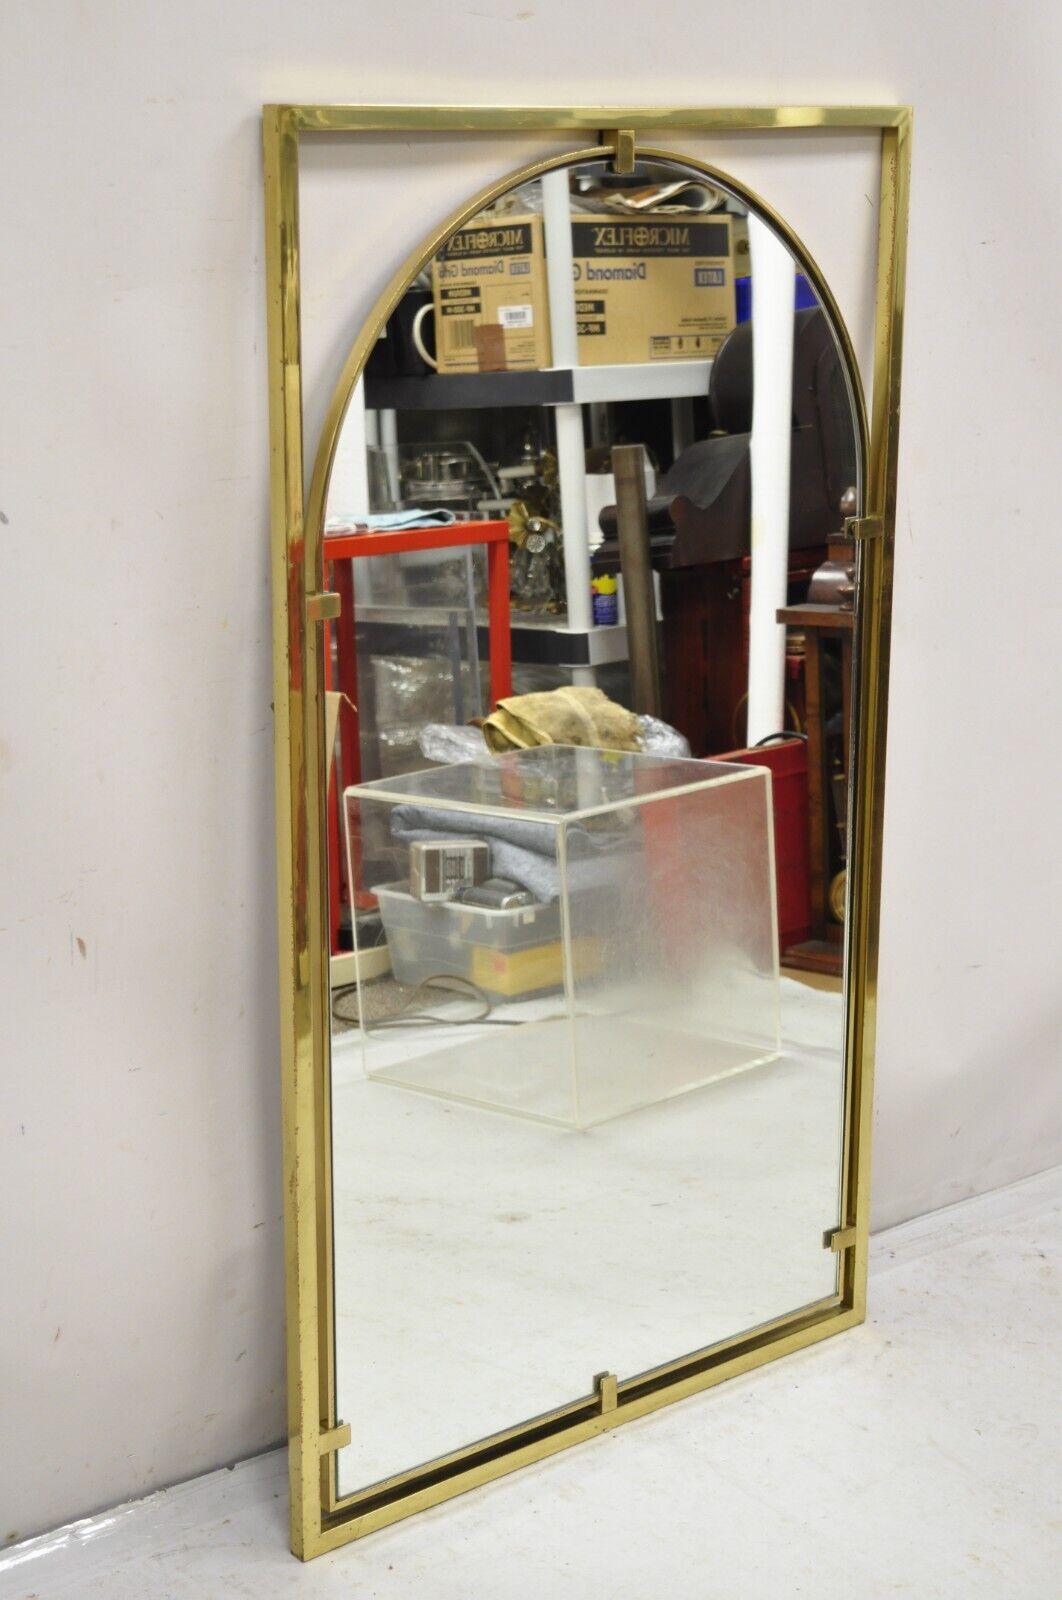 Vintage Hollywood Regency Brass Frame Arched Glass Modernist Wall Mirror by John Stuart. Circa  Mid to Late 20th Century.
Measurements: 47